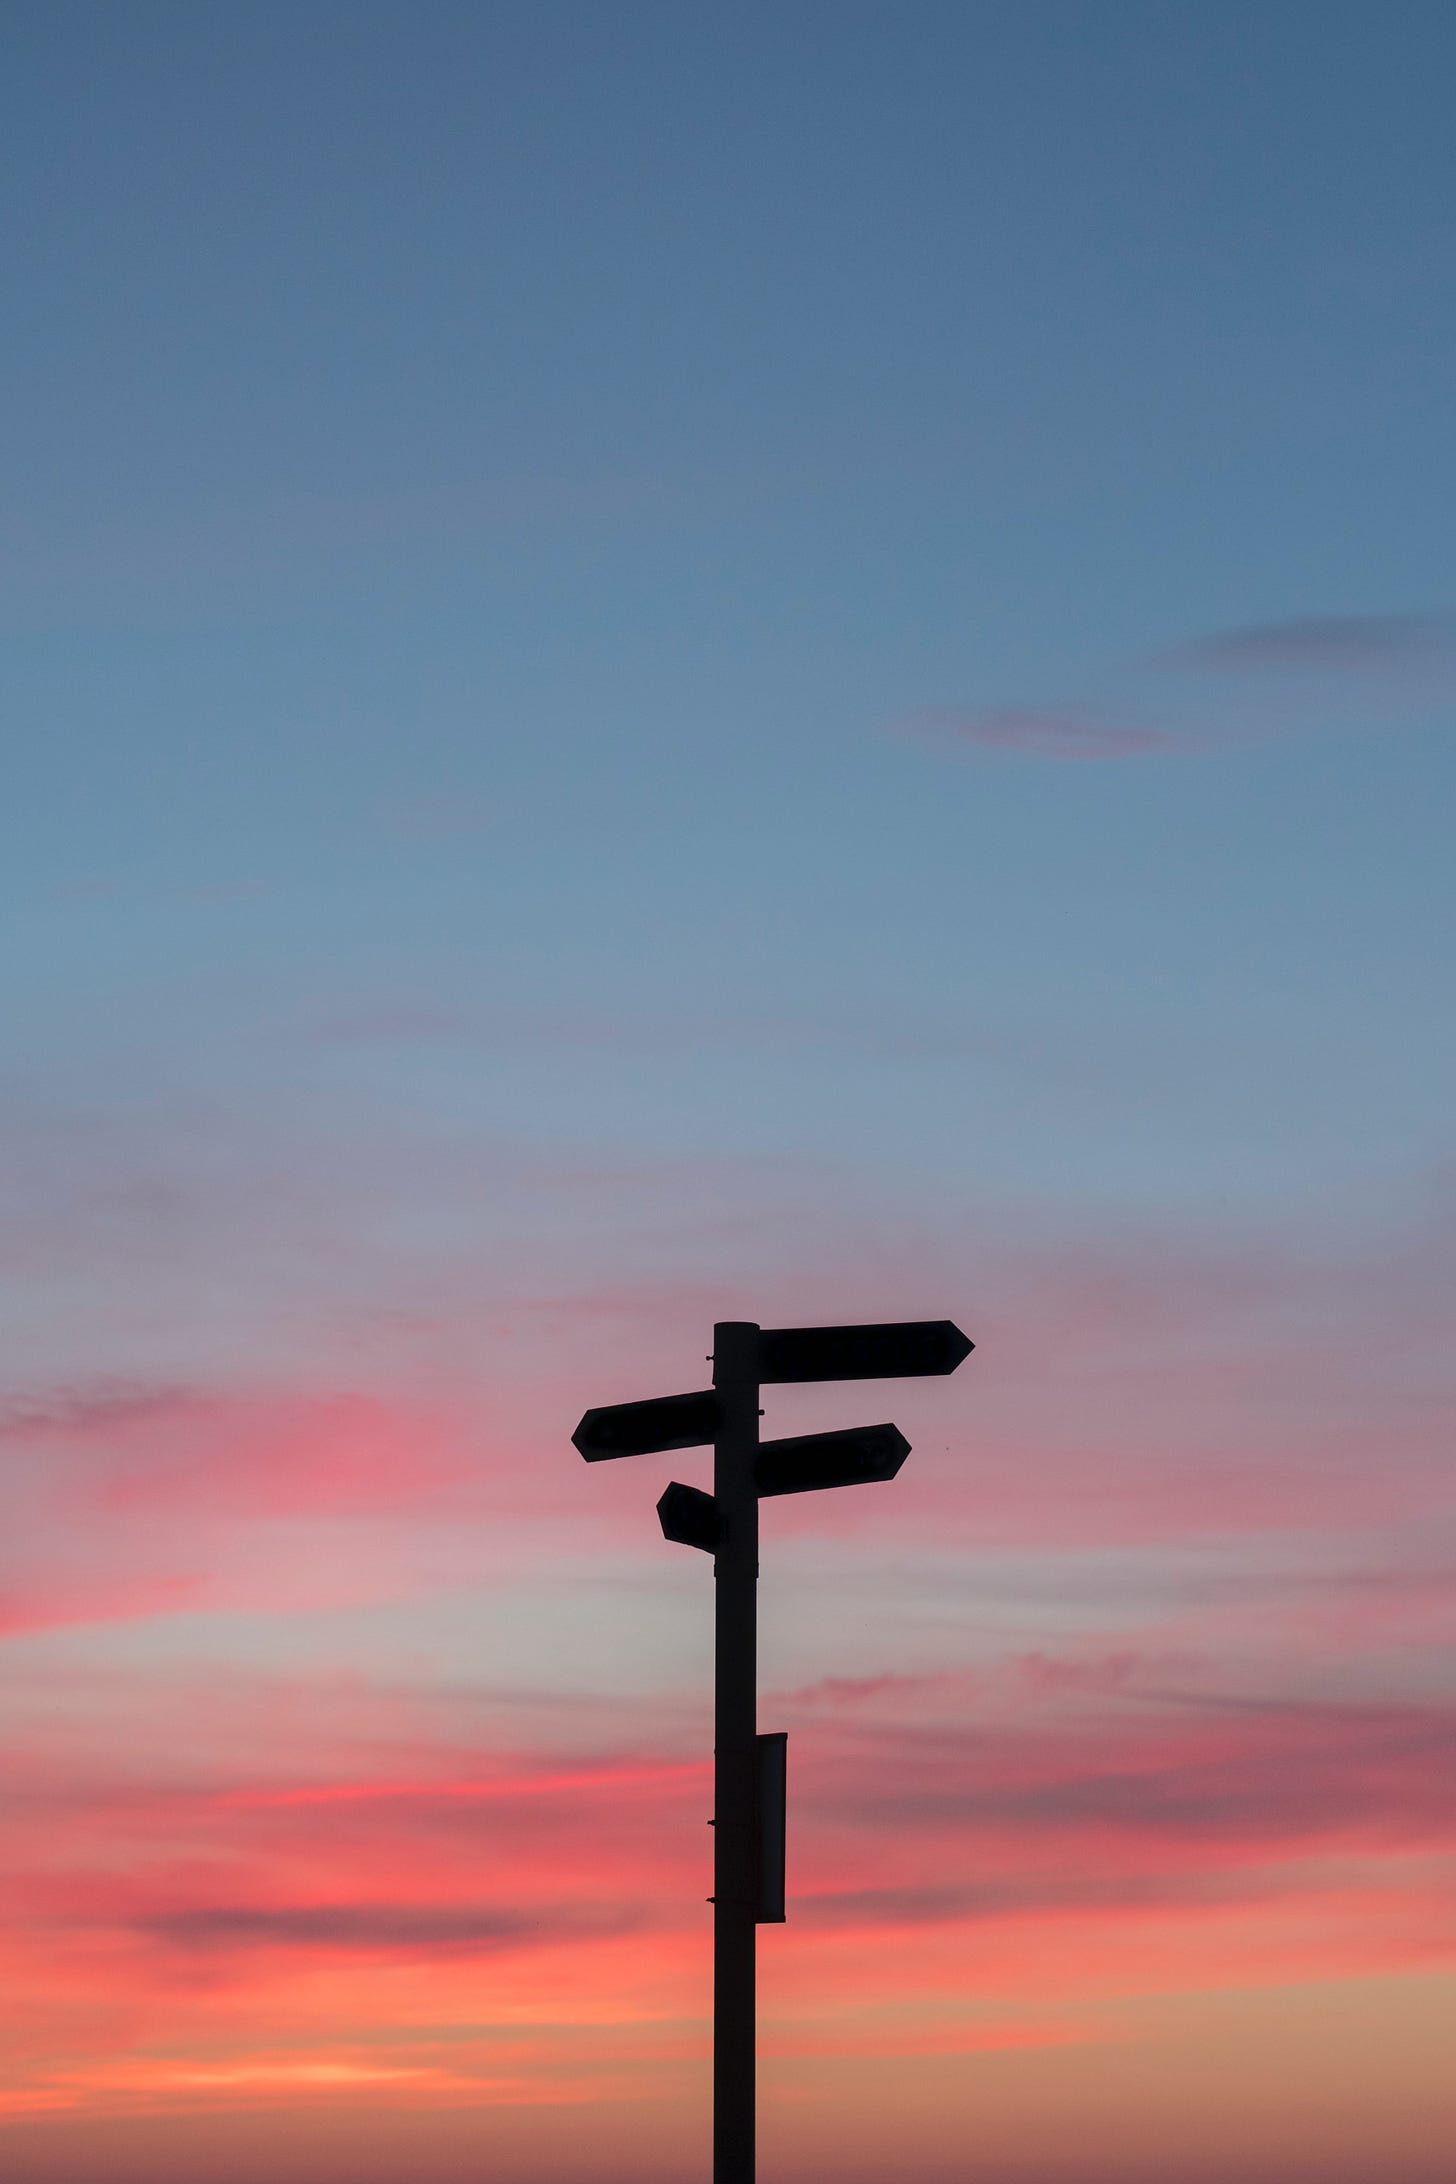 A beautiful pink and blue sky with a sign in silhouette that is pointing many directions.